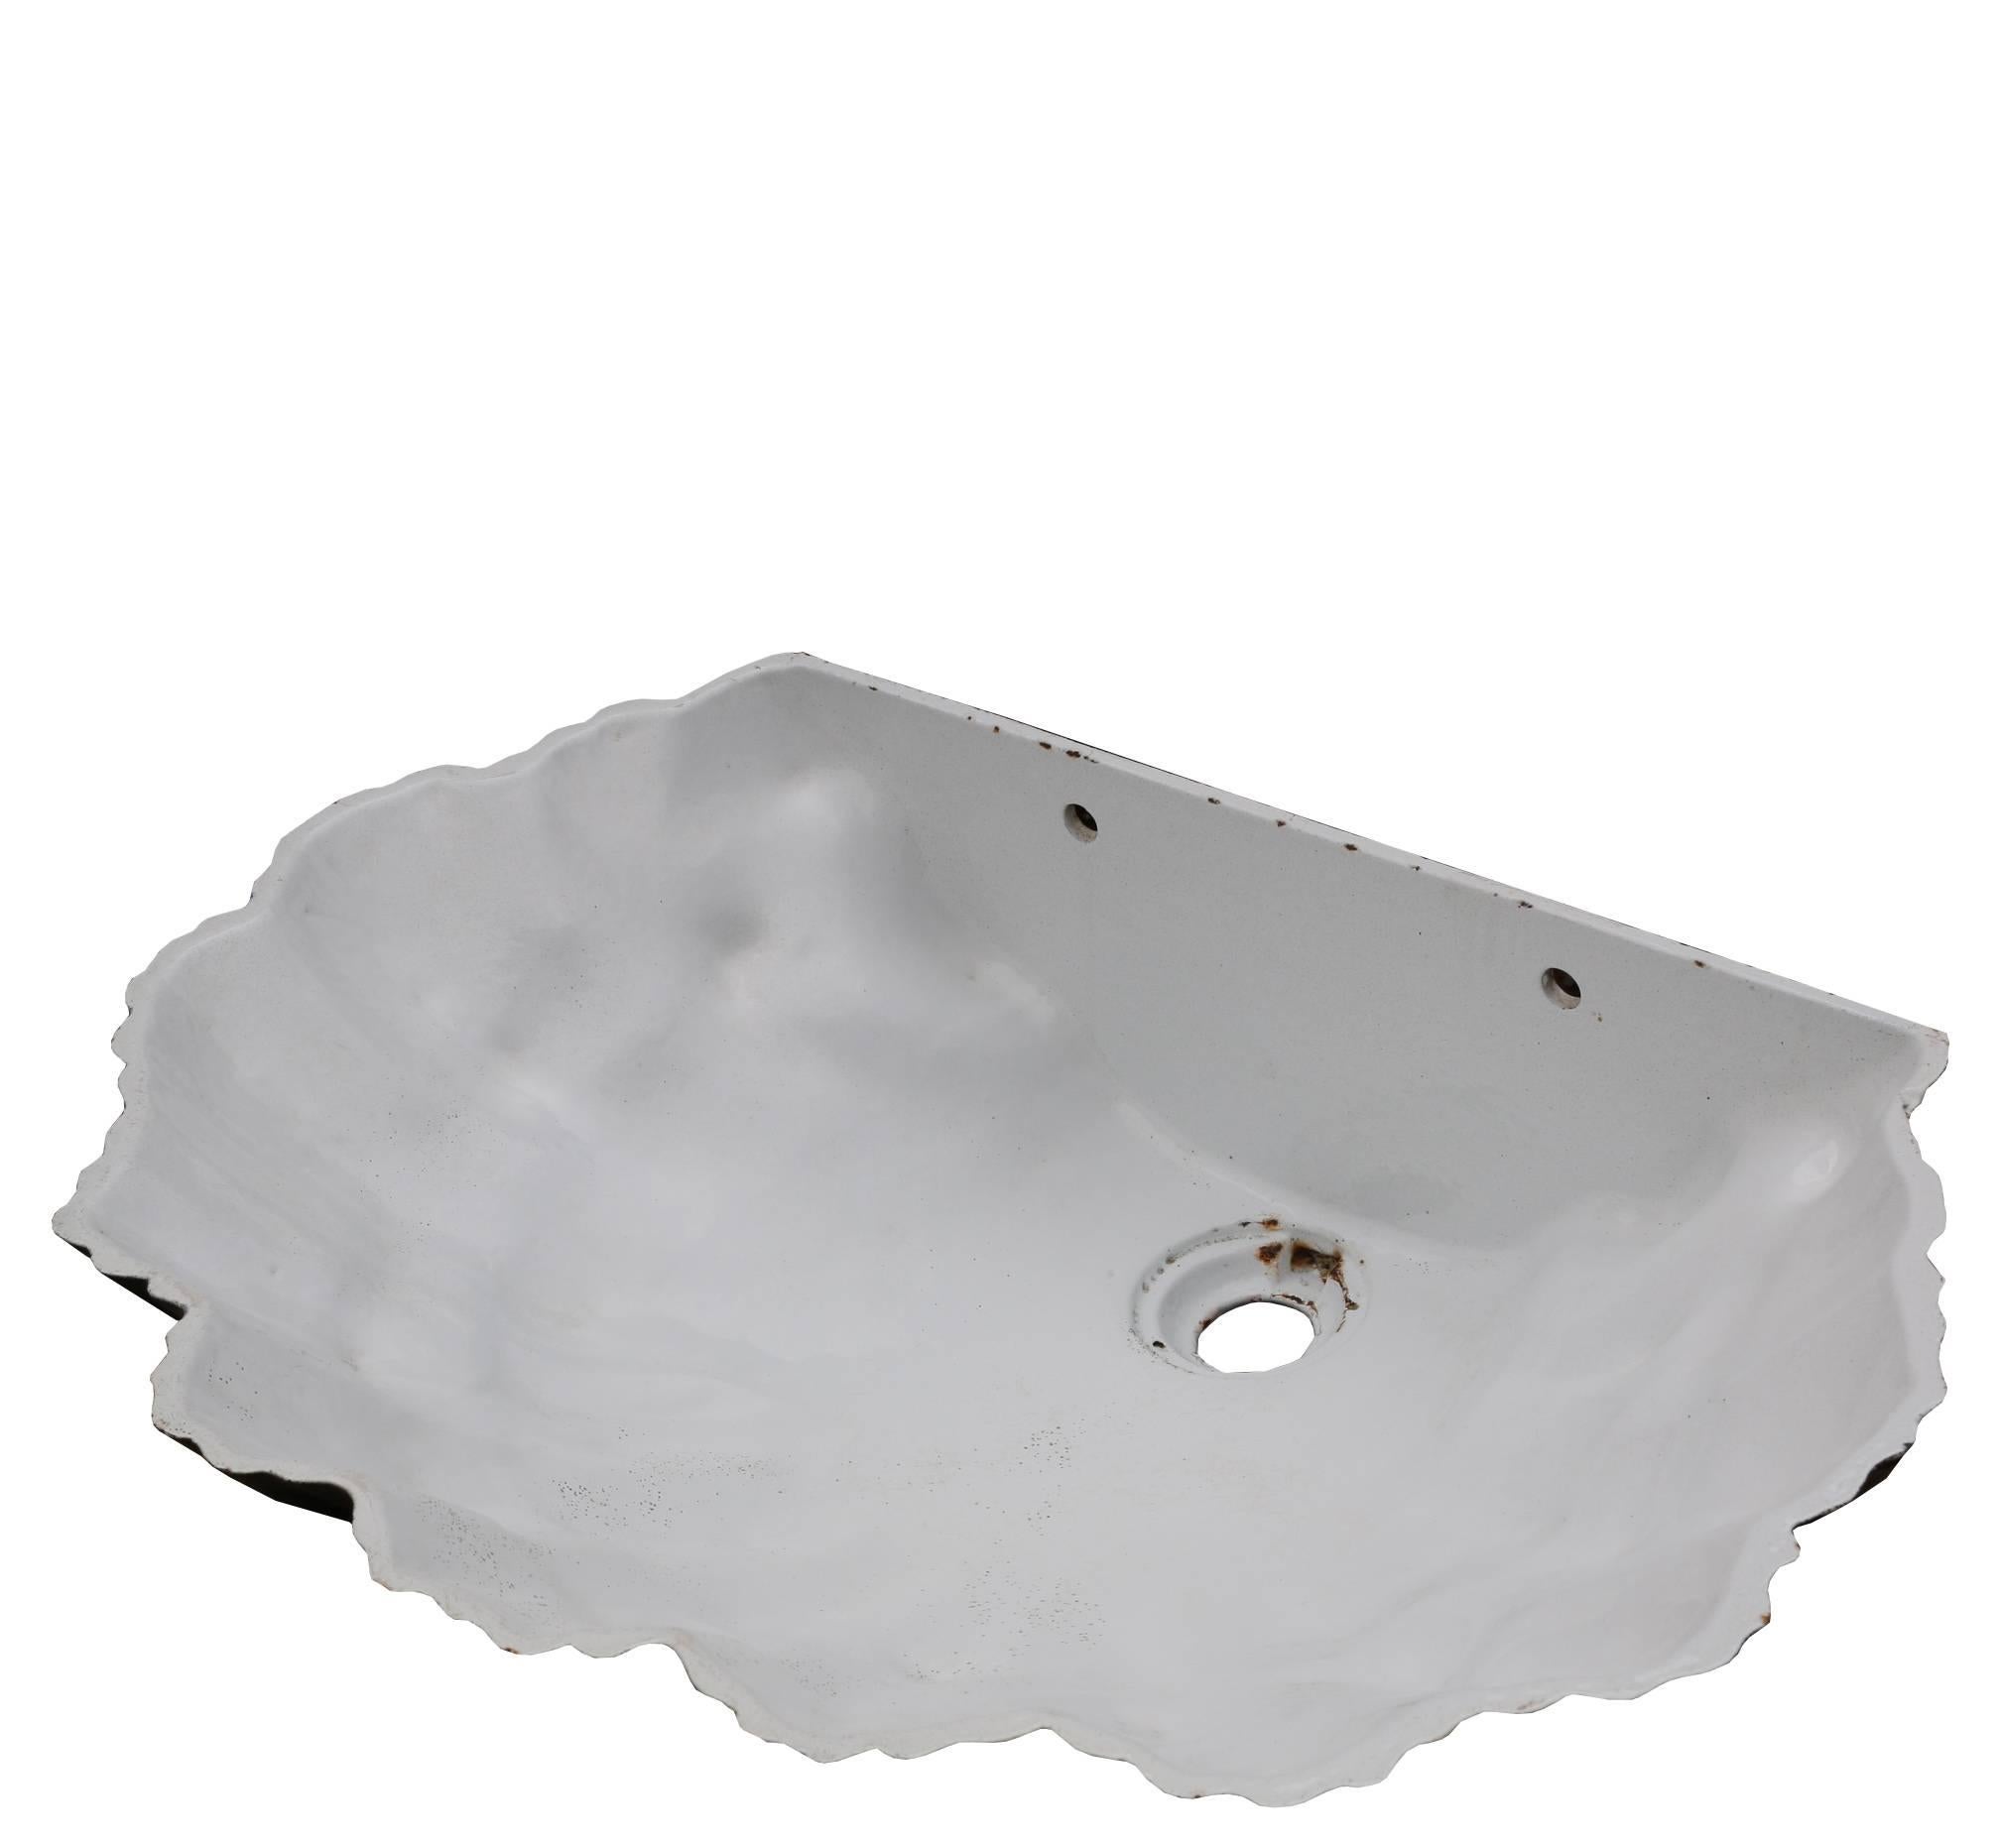 The basin is made from vitreous enamel, is white on the inside and black and red on the outside.
This sink could be used for both interior and exterior use.
This sink is wall-mounted with two holes in the back for the wall fixing.
Weight 12 kg.